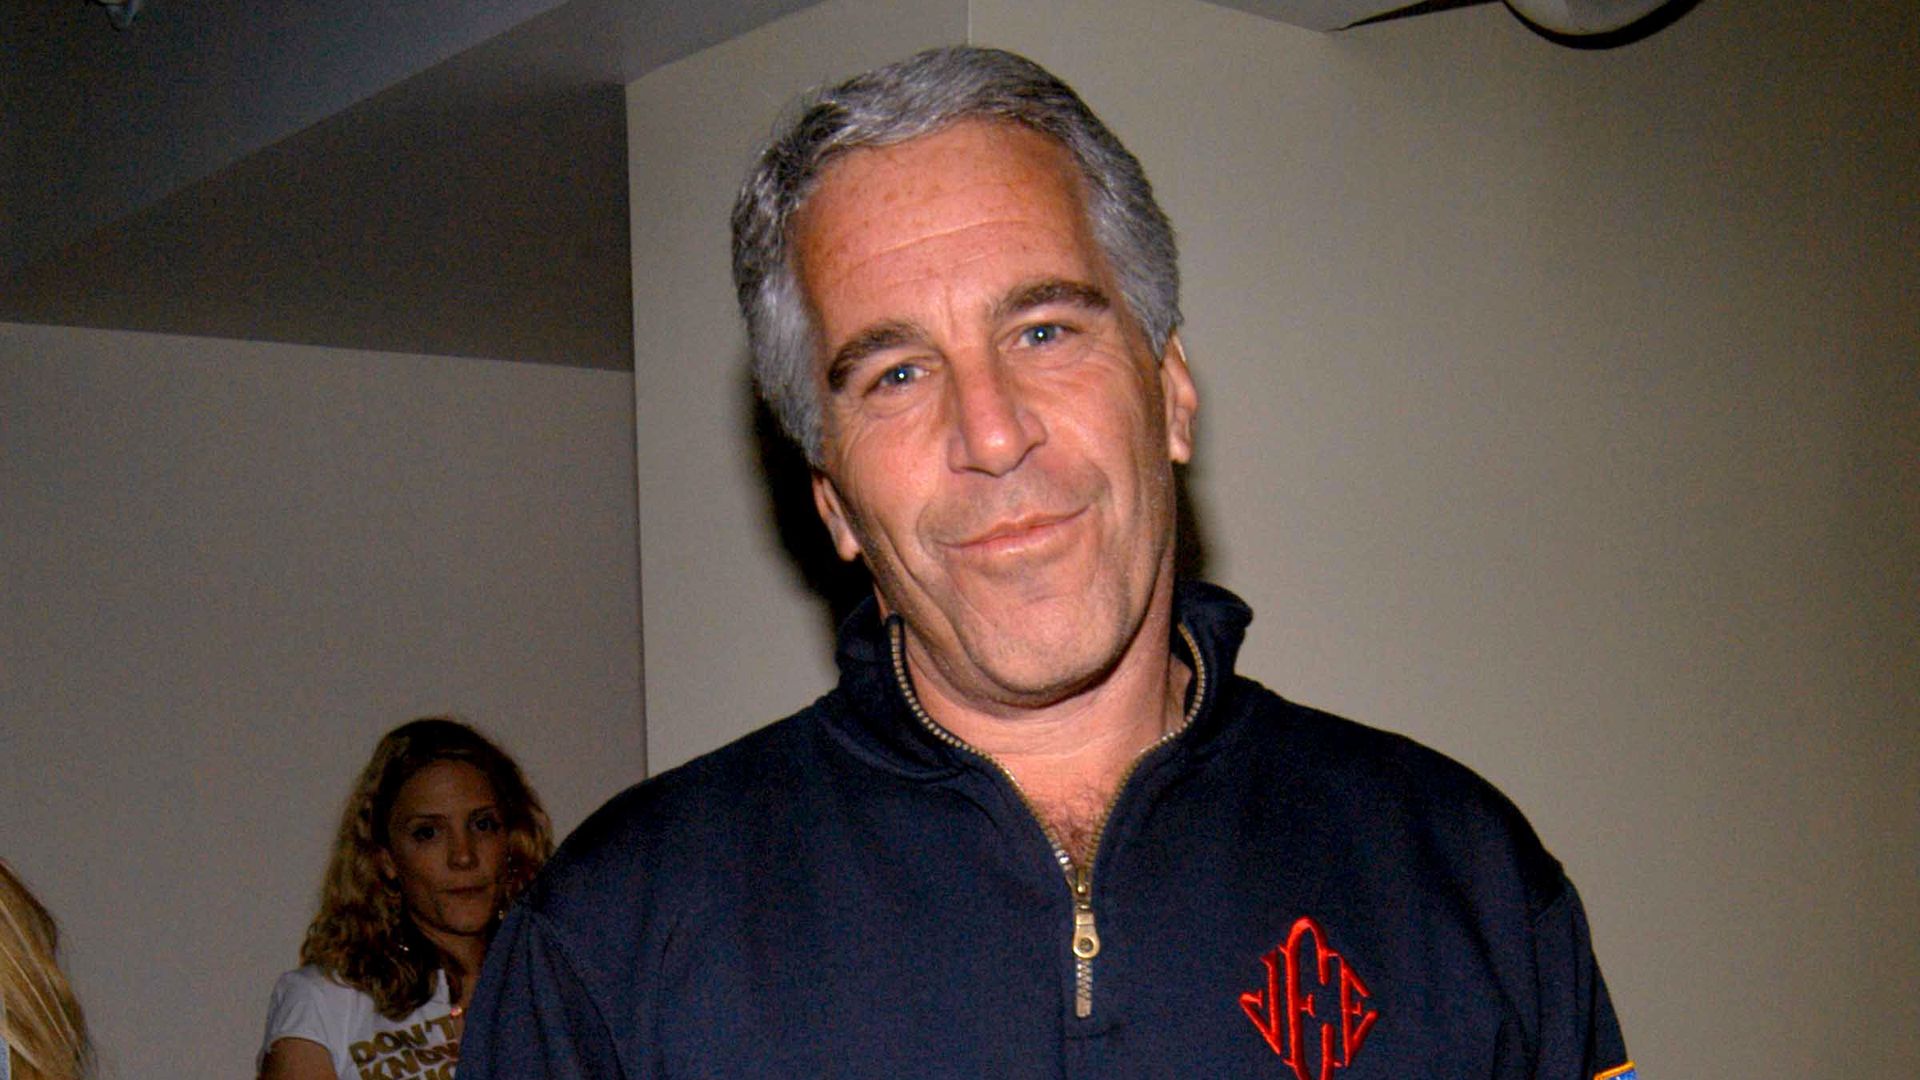 In this image, Epstein stands and looks at the camera while wearing a sweater pullover